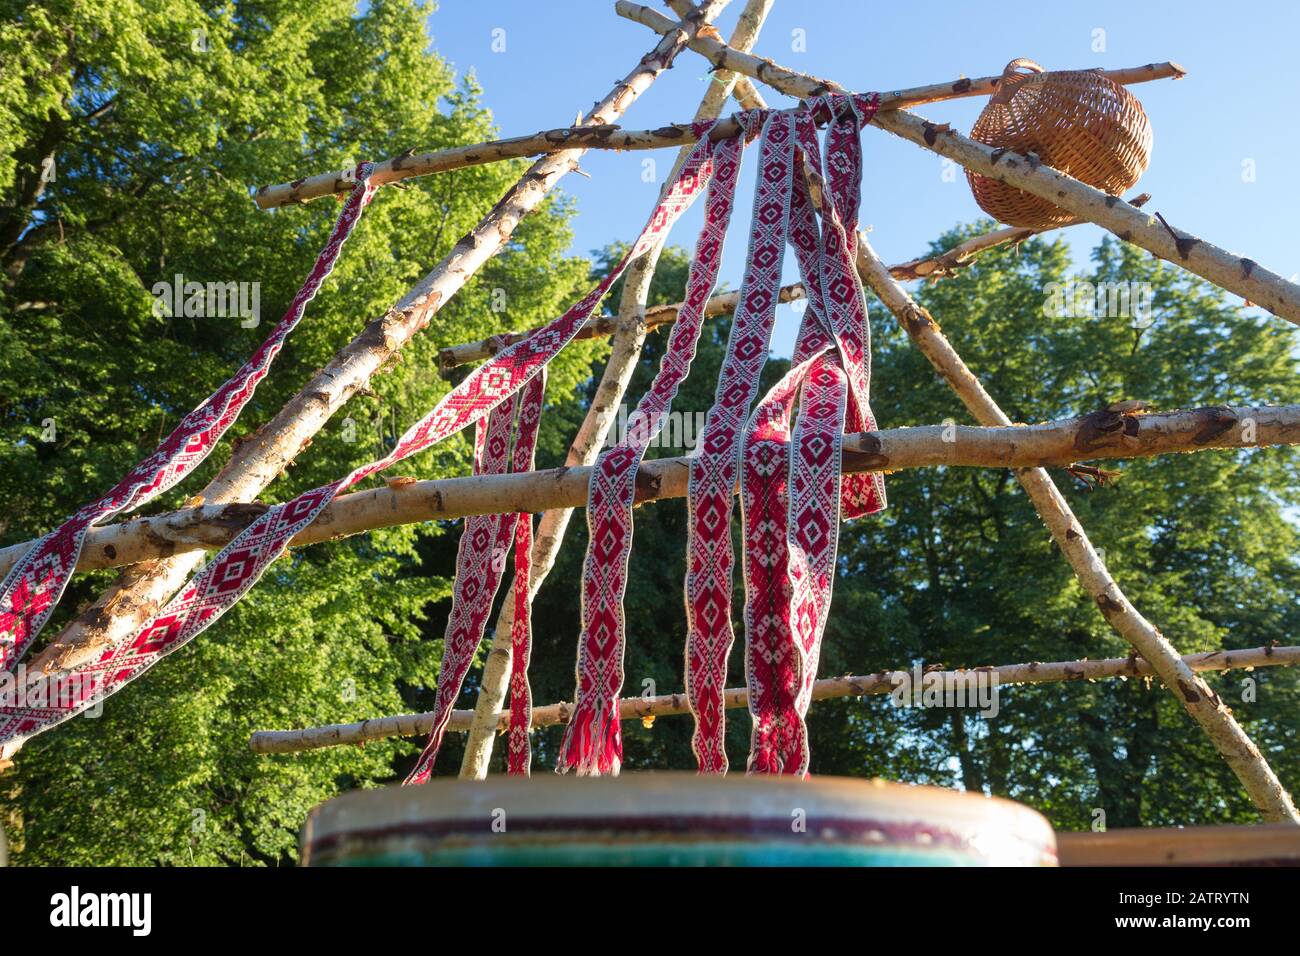 Preparation of traditional latvian ritual of celebrating summer solstice. Stock Photo